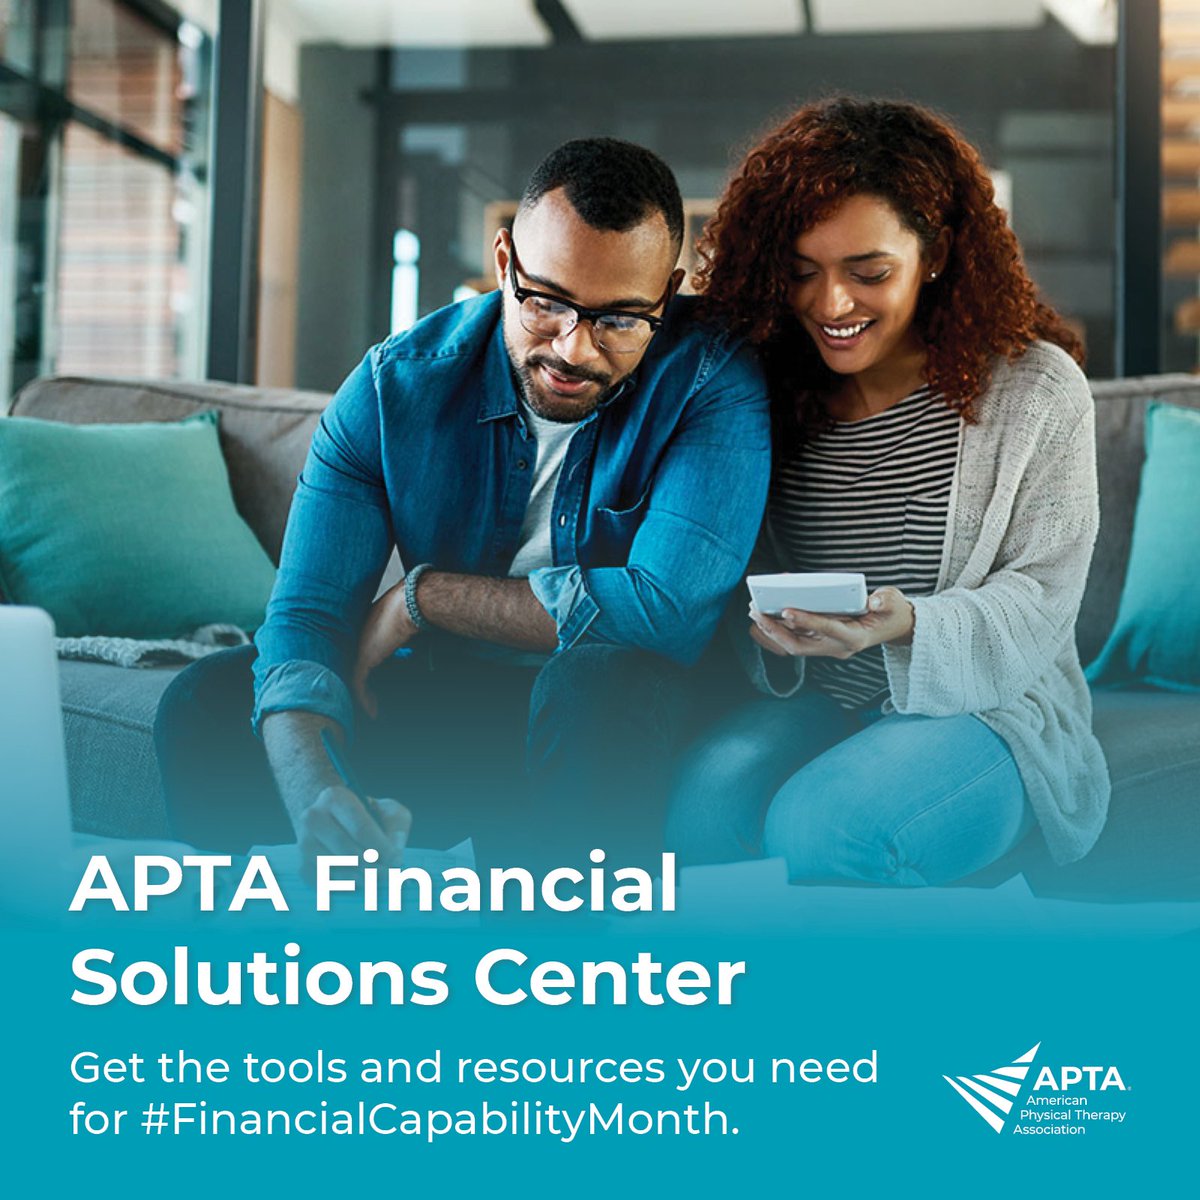 Get exclusive financial resources from APTA's Financial Solution Center for #FinancialCapabilityMonth! 💸 Take advantage of education and planning resources, manage student debt, and see if you qualify for public service loan forgiveness: apta.org/your-career/fi…